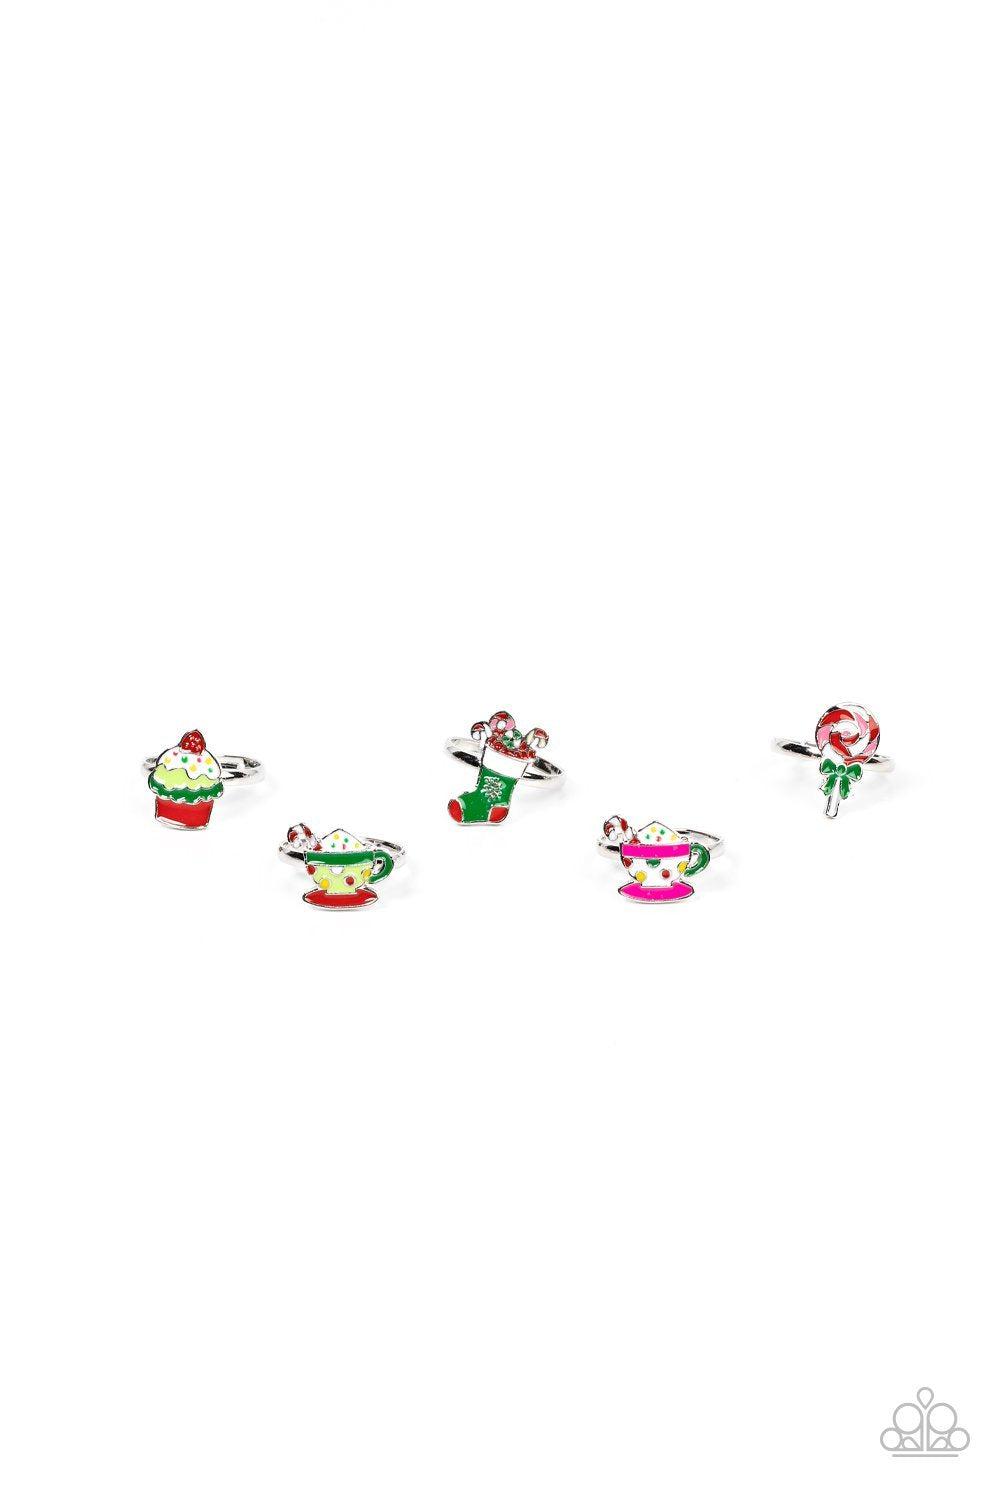 Starlet Shimmer Children&#39;s Christmas Holiday Themed Rings 2021 - Paparazzi Accessories (set of 5) - Full set -CarasShop.com - $5 Jewelry by Cara Jewels